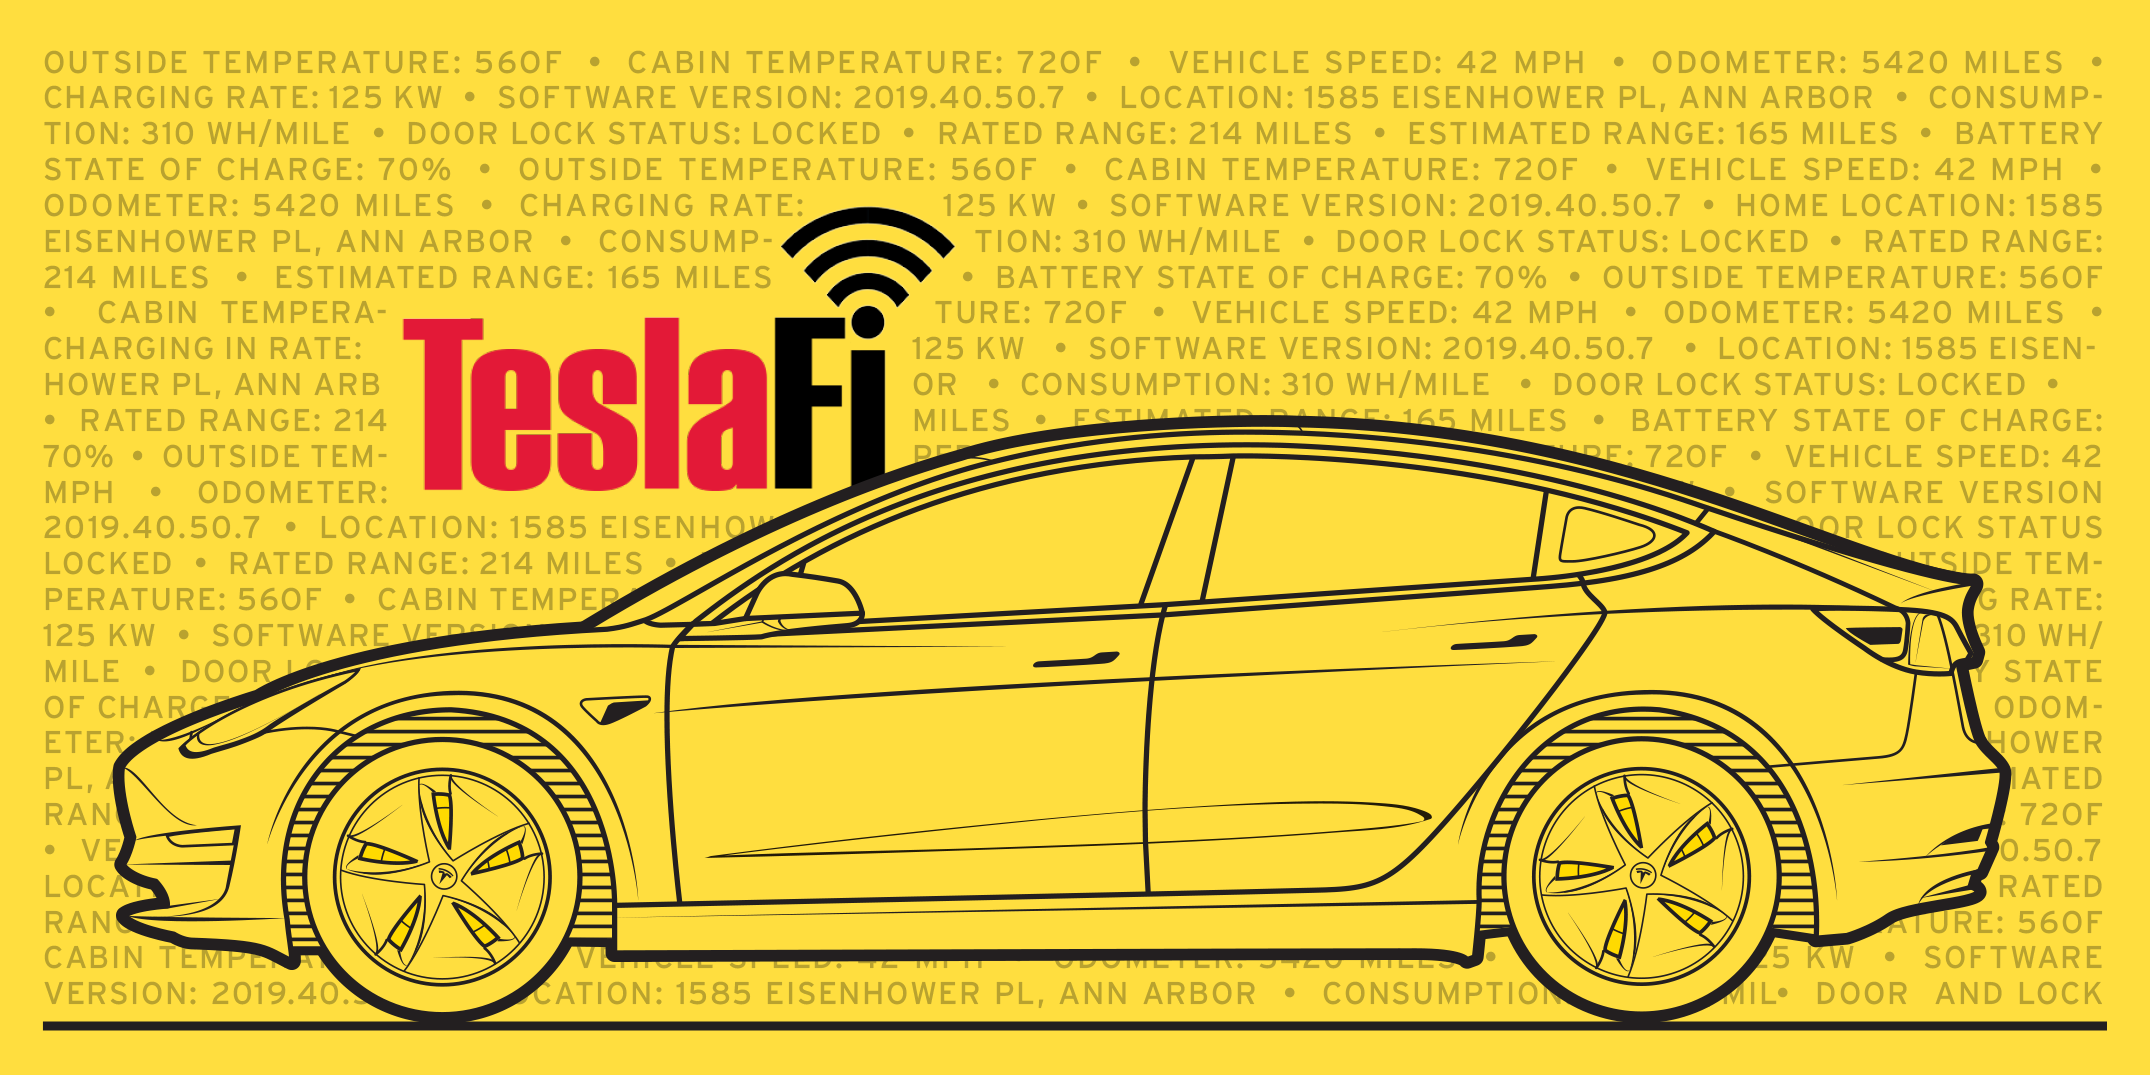 TeslaFi is software that allows Tesla owners to geek out over their cars